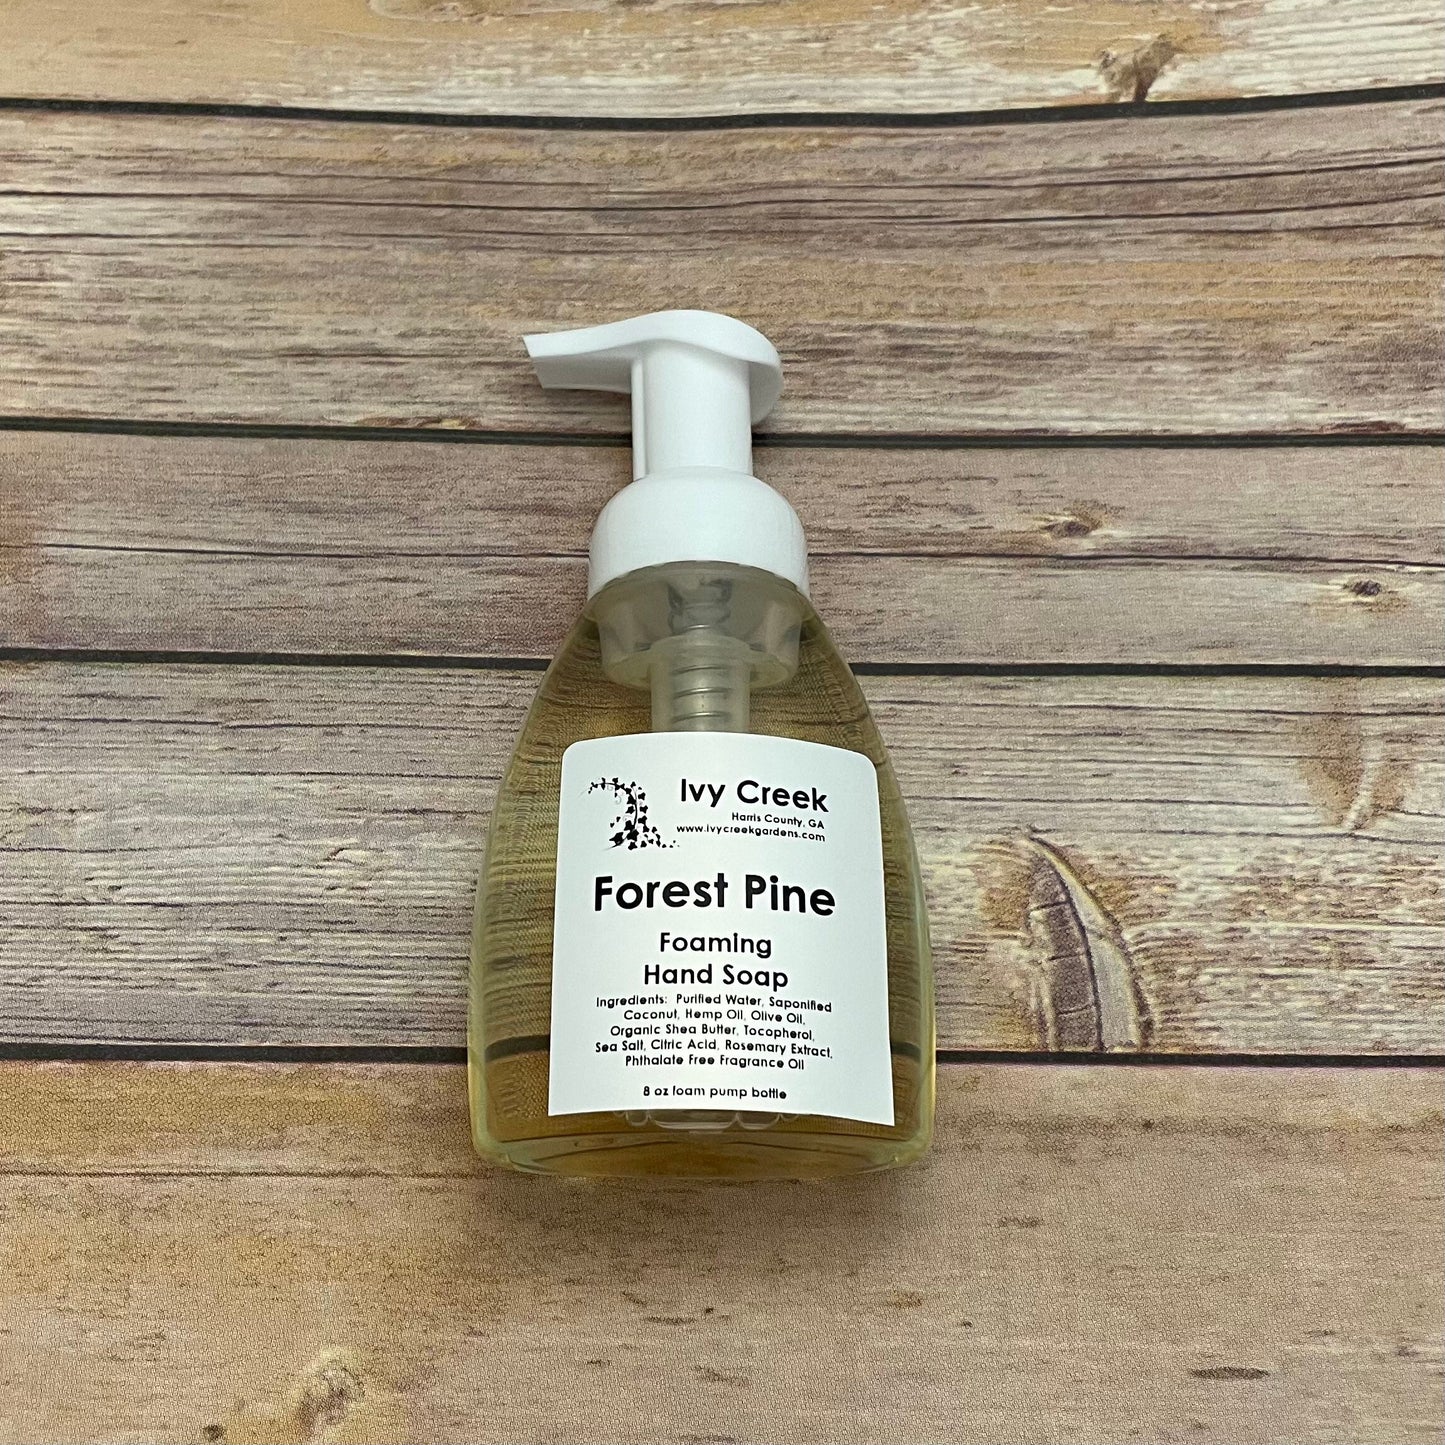 Ivy Creek Forest Pine Foaming Hand Soap - Natural Moisturizing Hand Soap - 8 oz